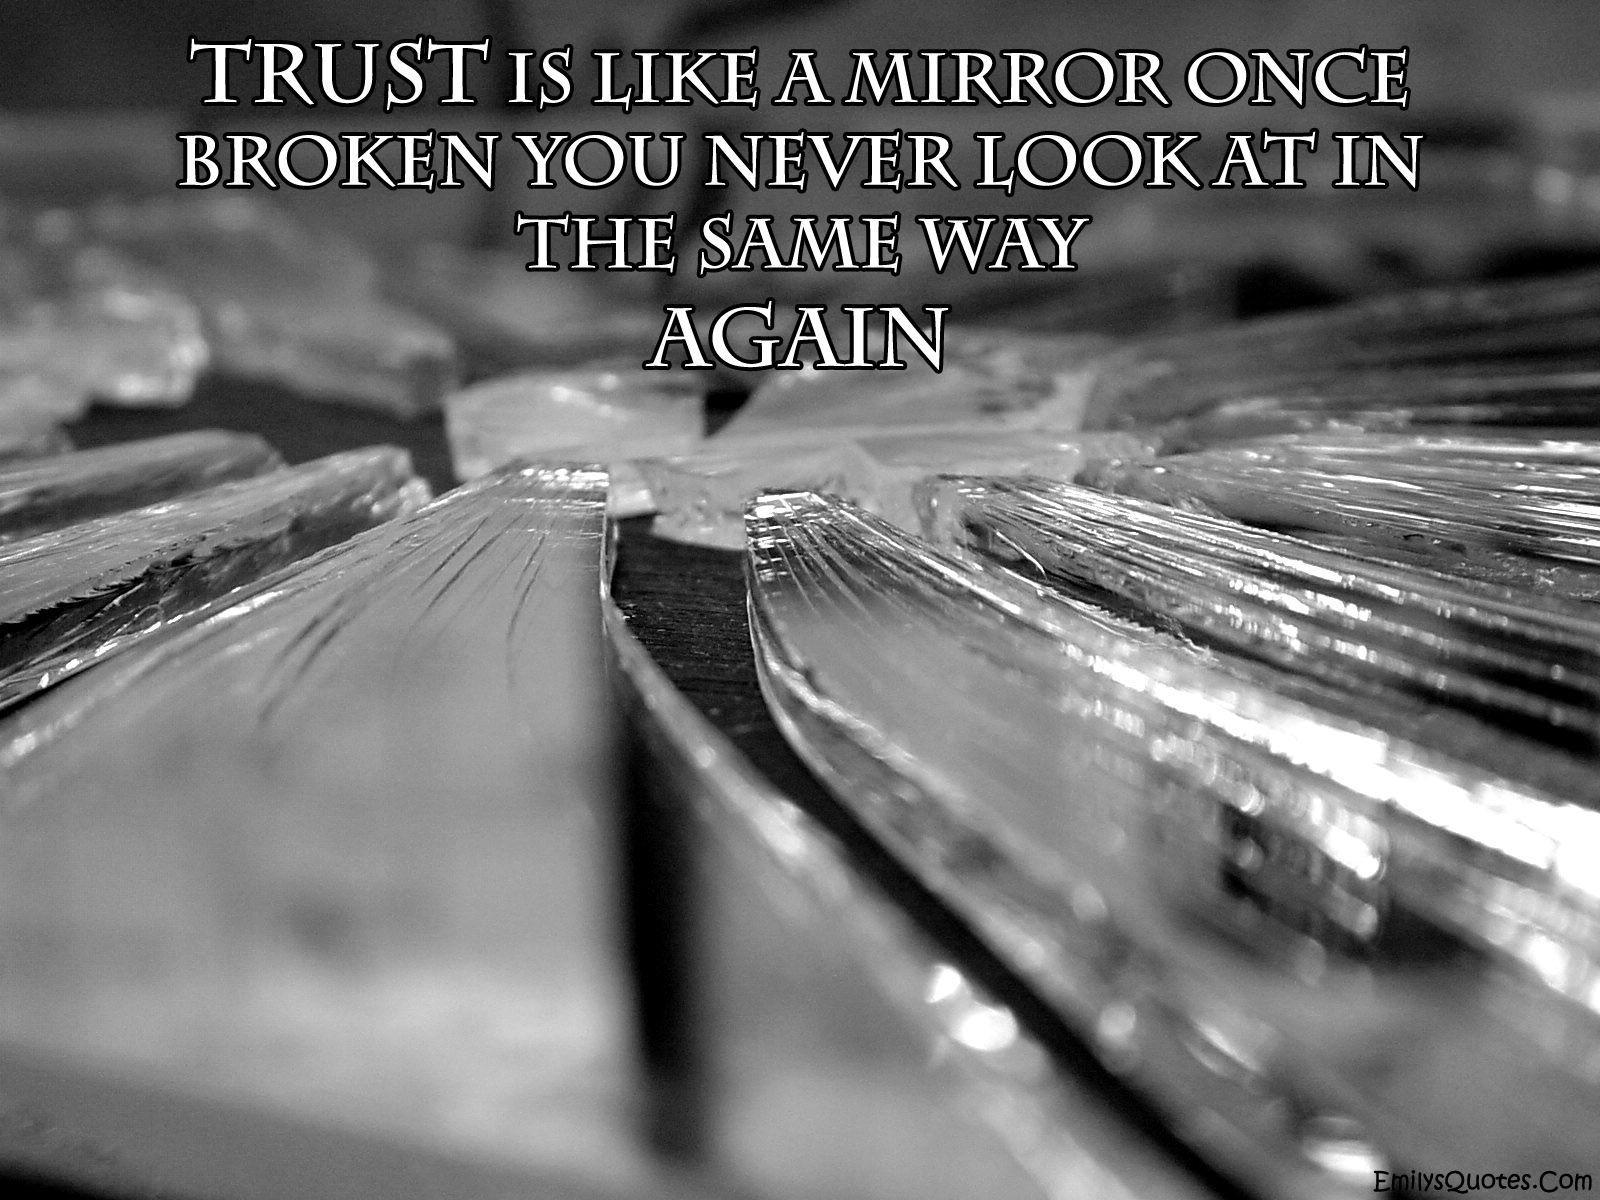 Trust Quotes For Facebook Tumblr Image and Wallpaper